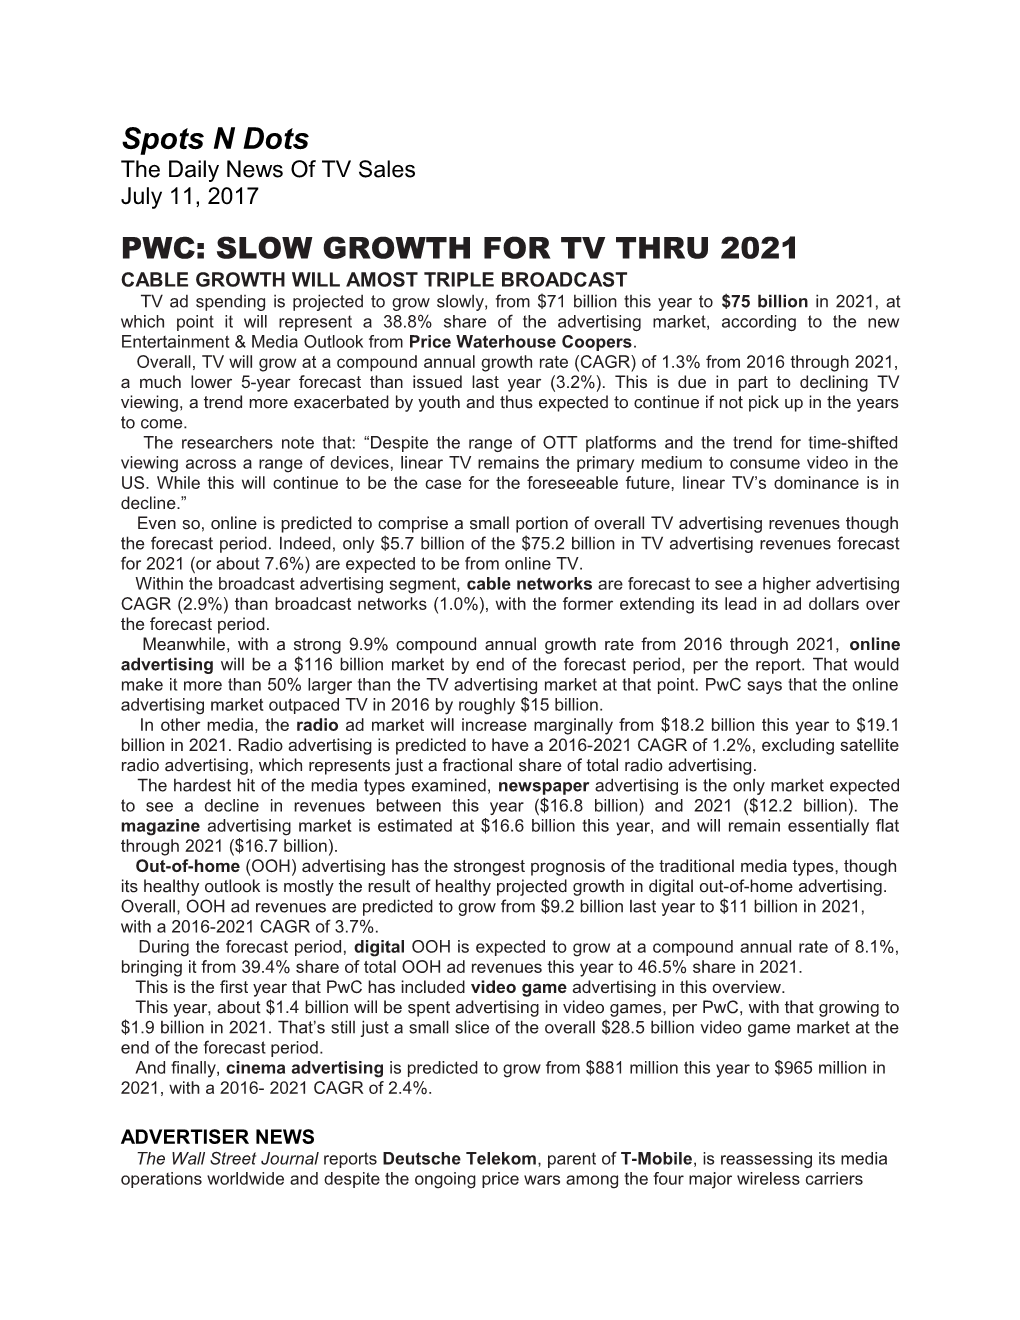 Pwc: Slow Growth for Tv Thru 2021